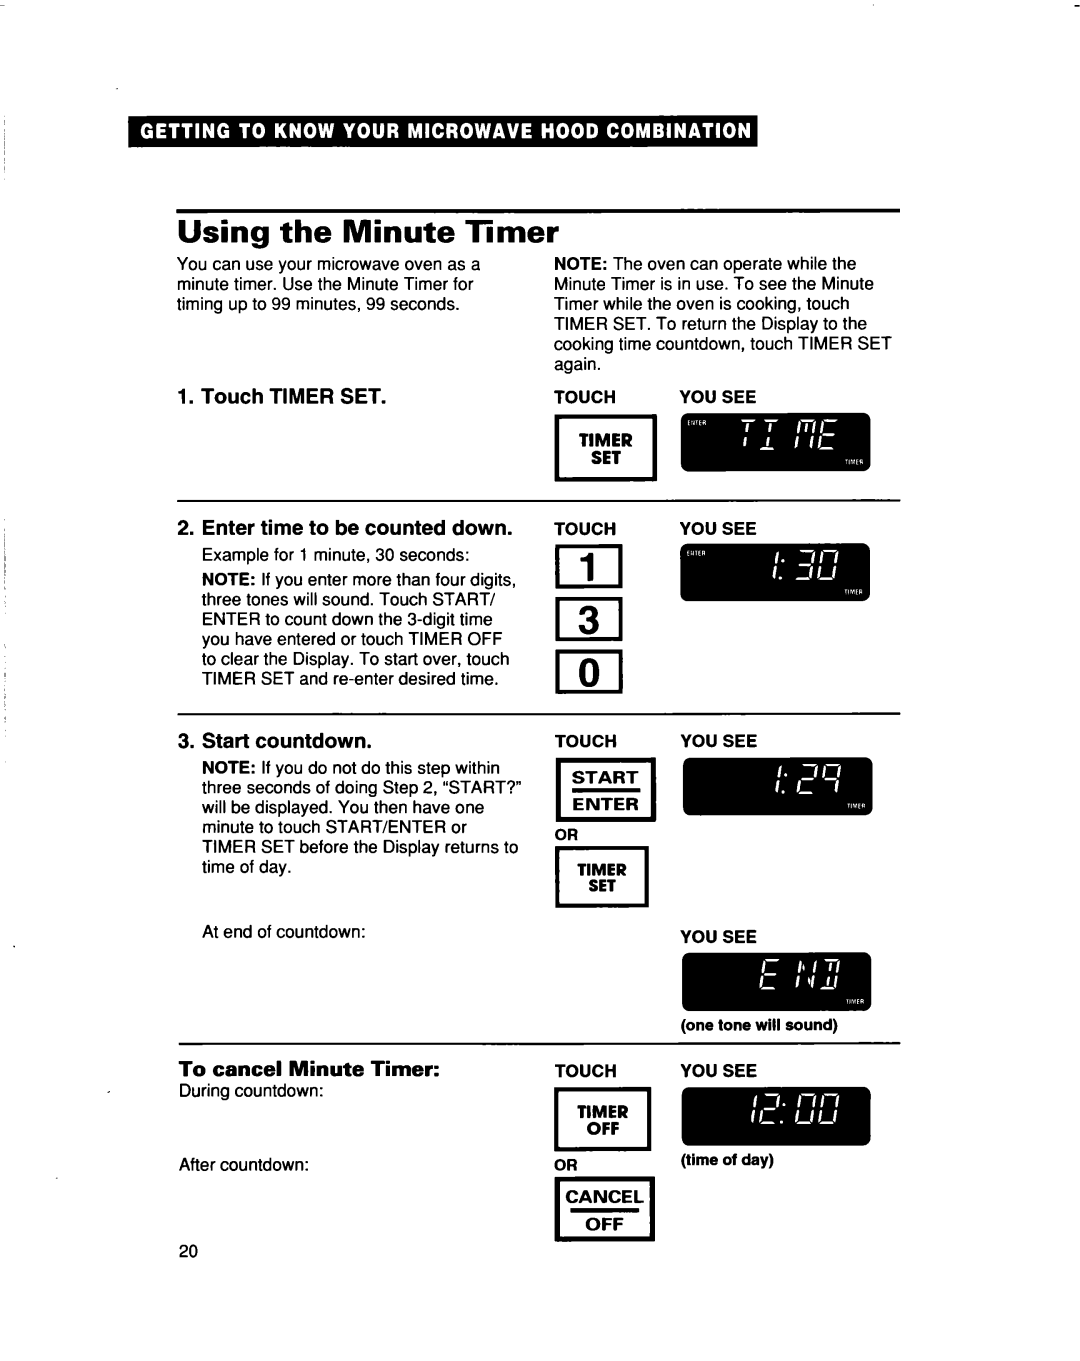 Whirlpool MHEI IRD Using the Minute Timer, Touch TIMER SET 2.Enter time to be counted down, Star-tcountdown, Touch You See 